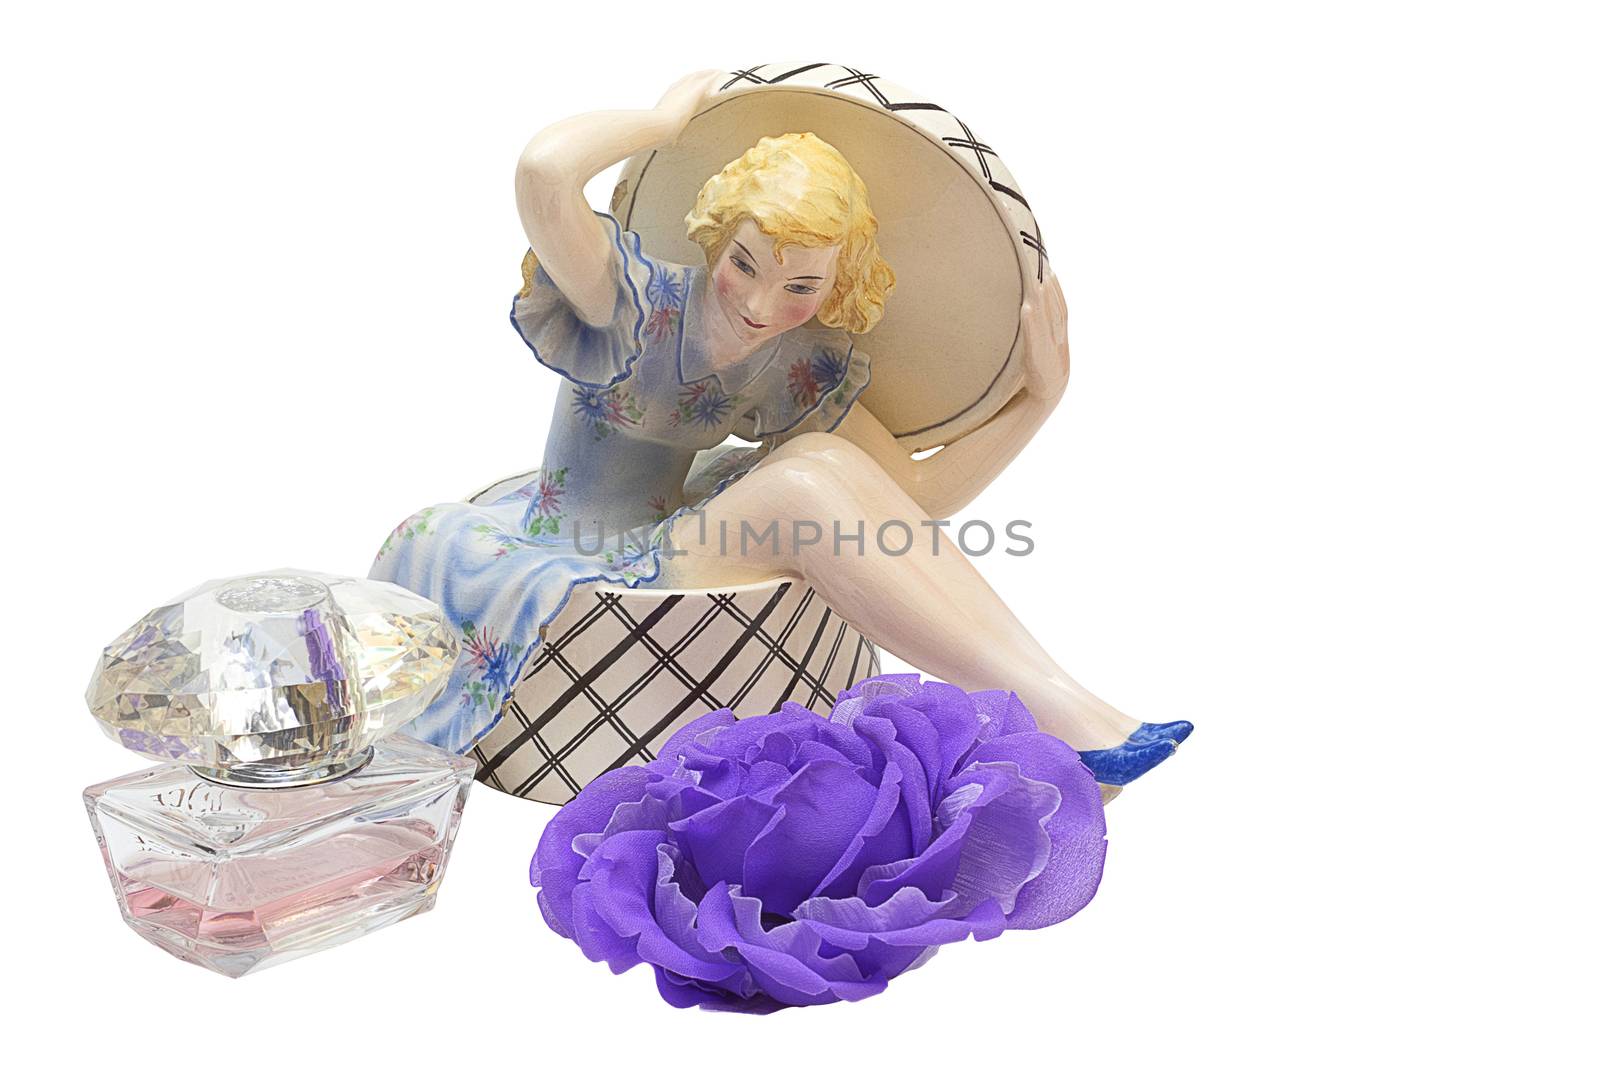 Old porcelain figurine of a ballerina and artificial flower on a white background